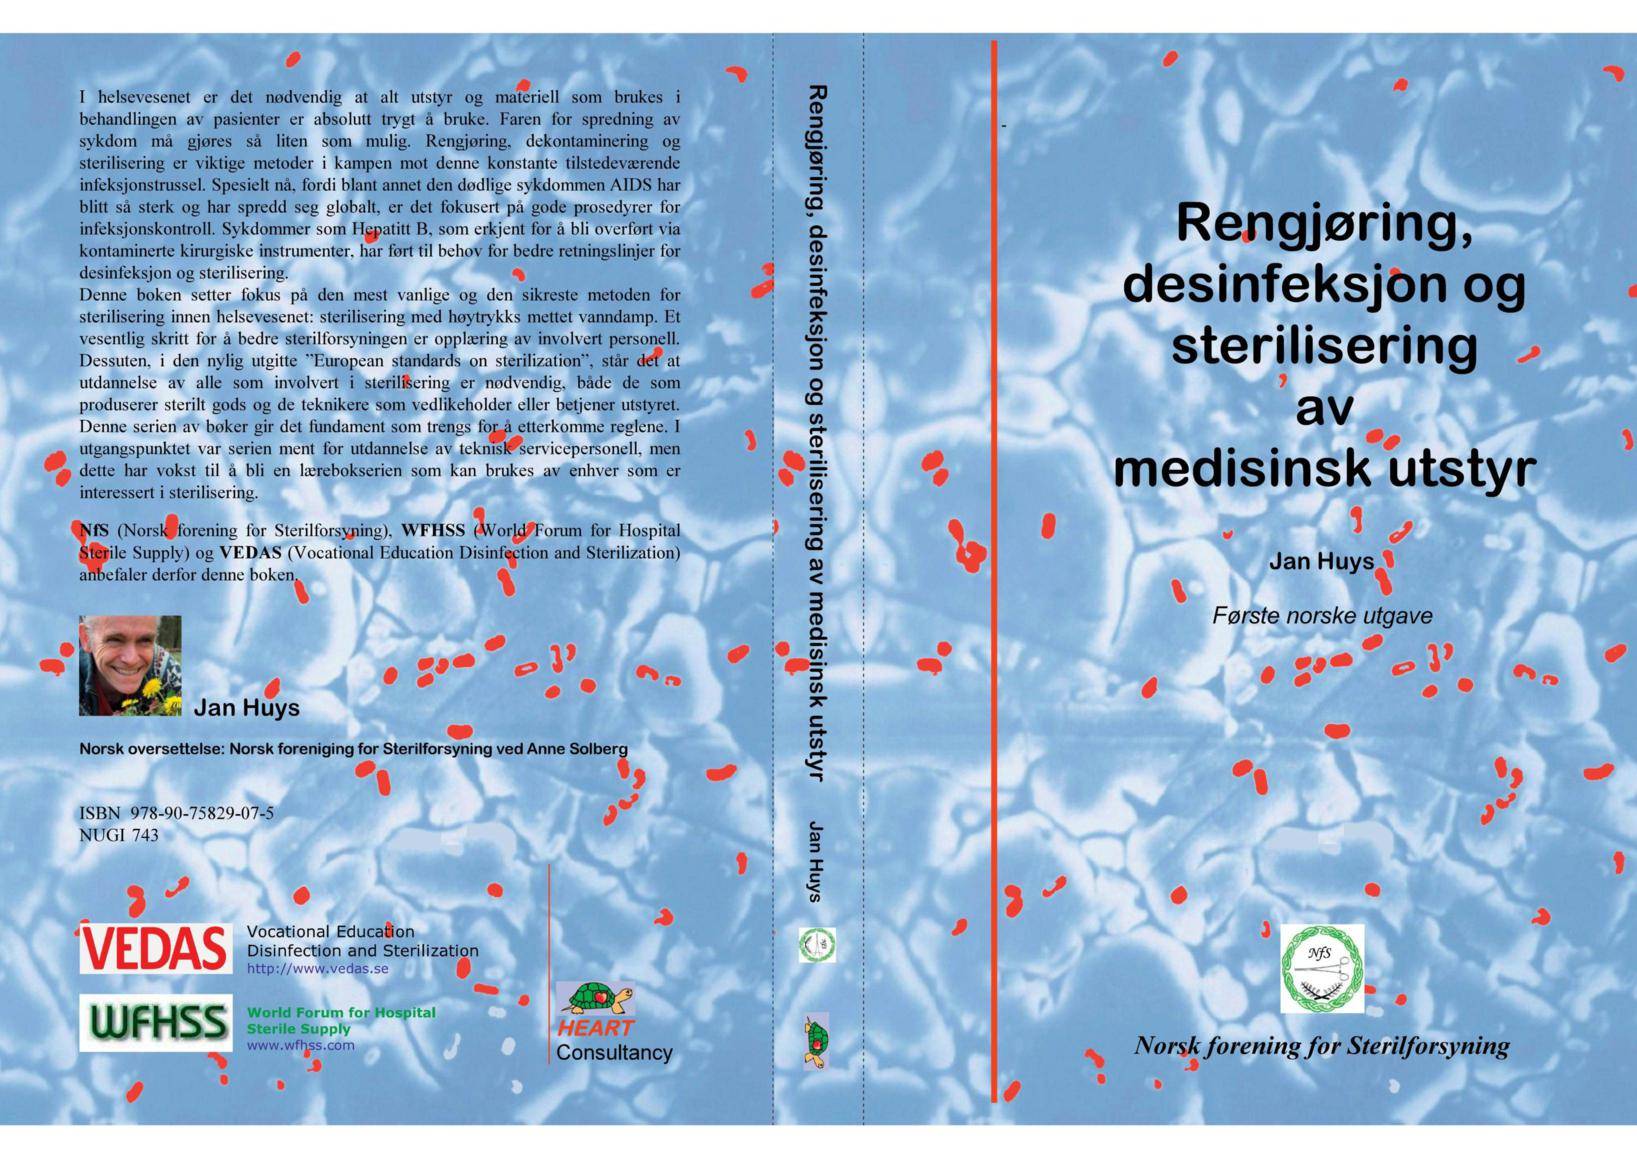 2014-02-20. Cover of the Norwegian version of the book. Realized and published throu the Norsk forening for Sterilforsyning.